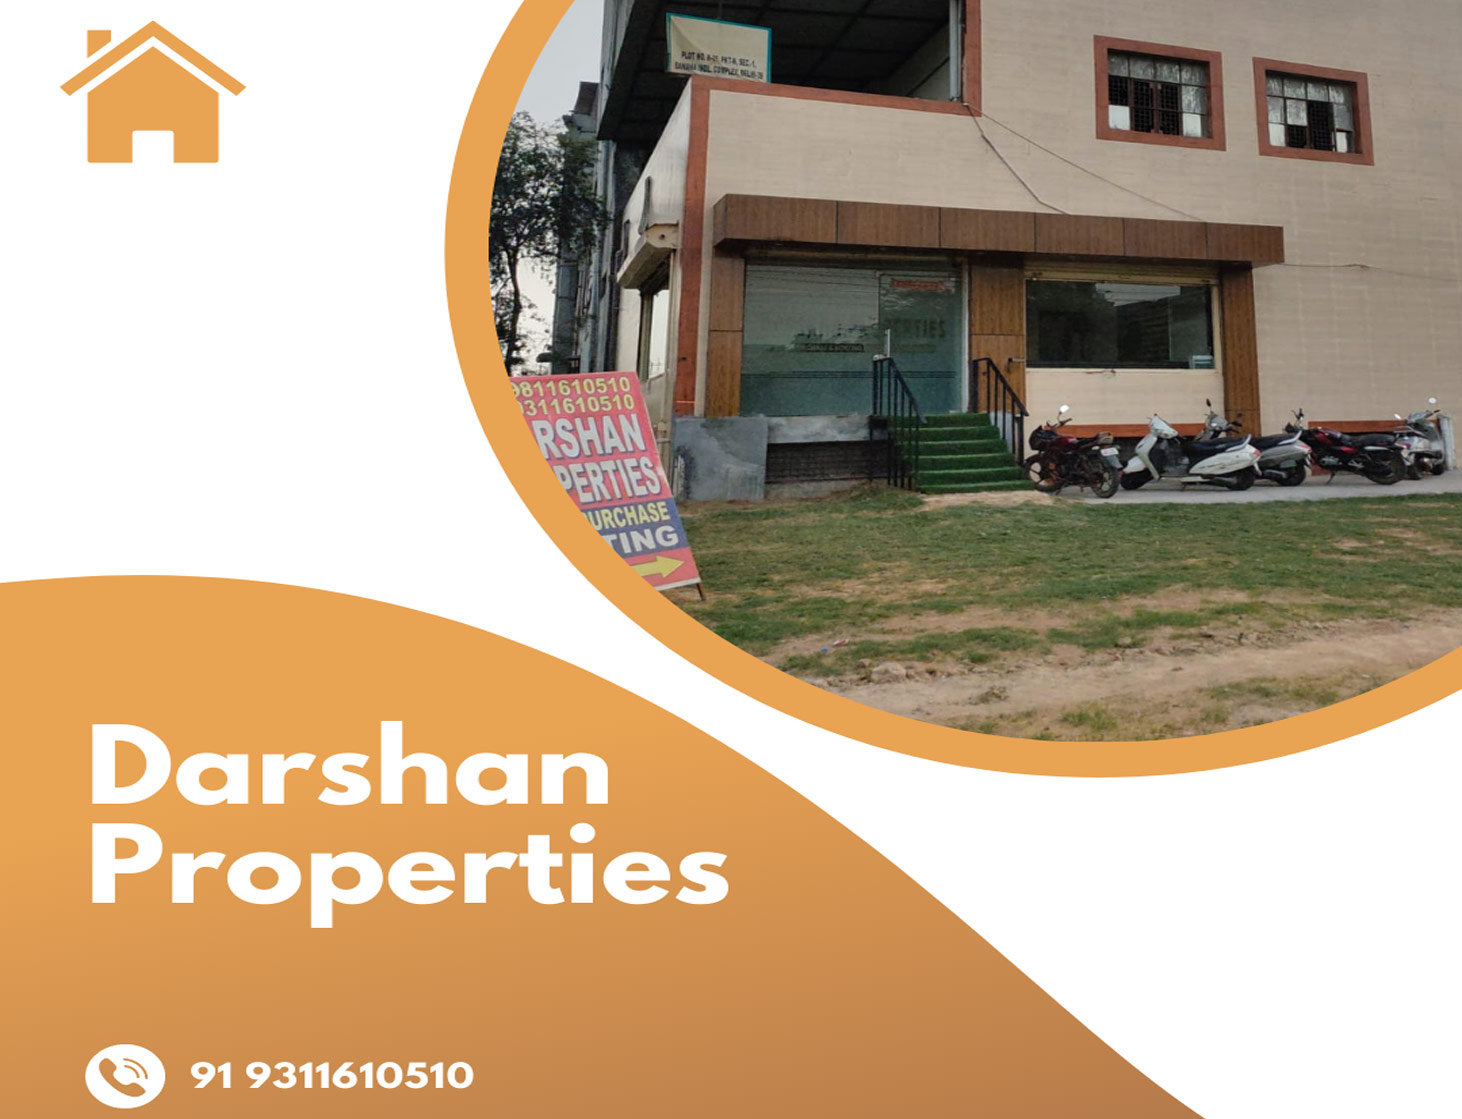 Darshan Properties is a company of Property Sale Purchase In Bawana